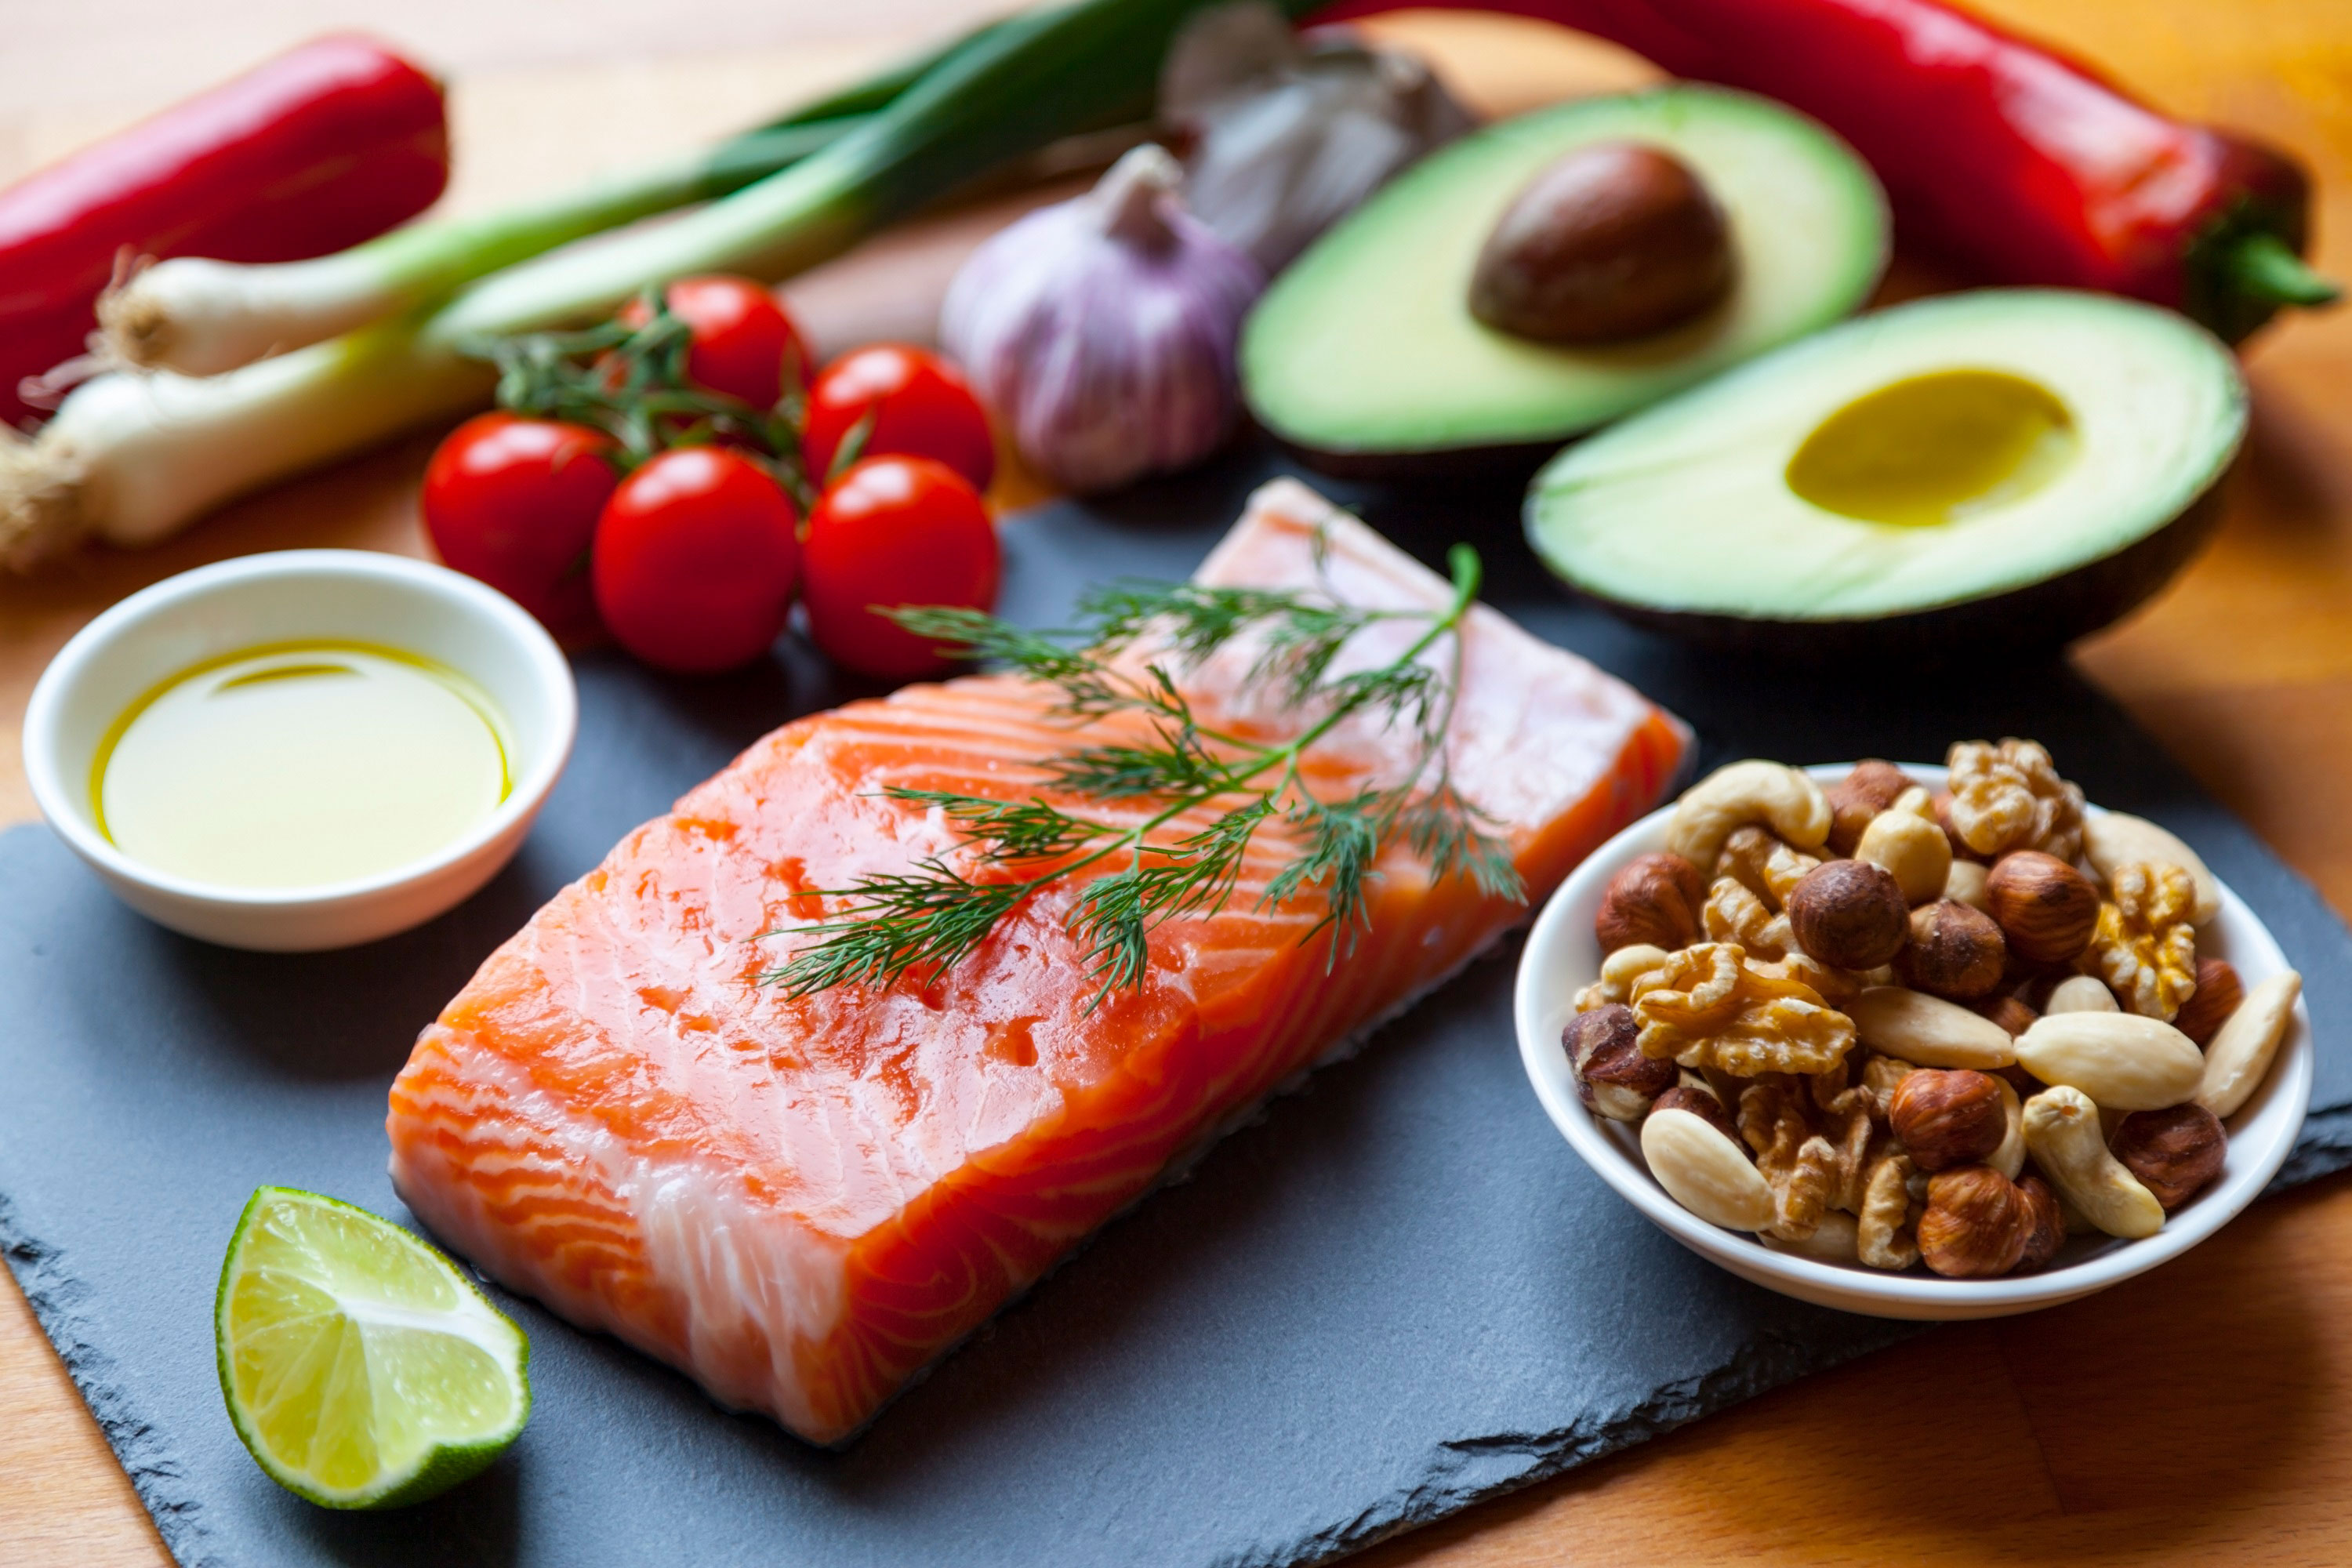 4 Easy Ways to Lower Your Cholesterol